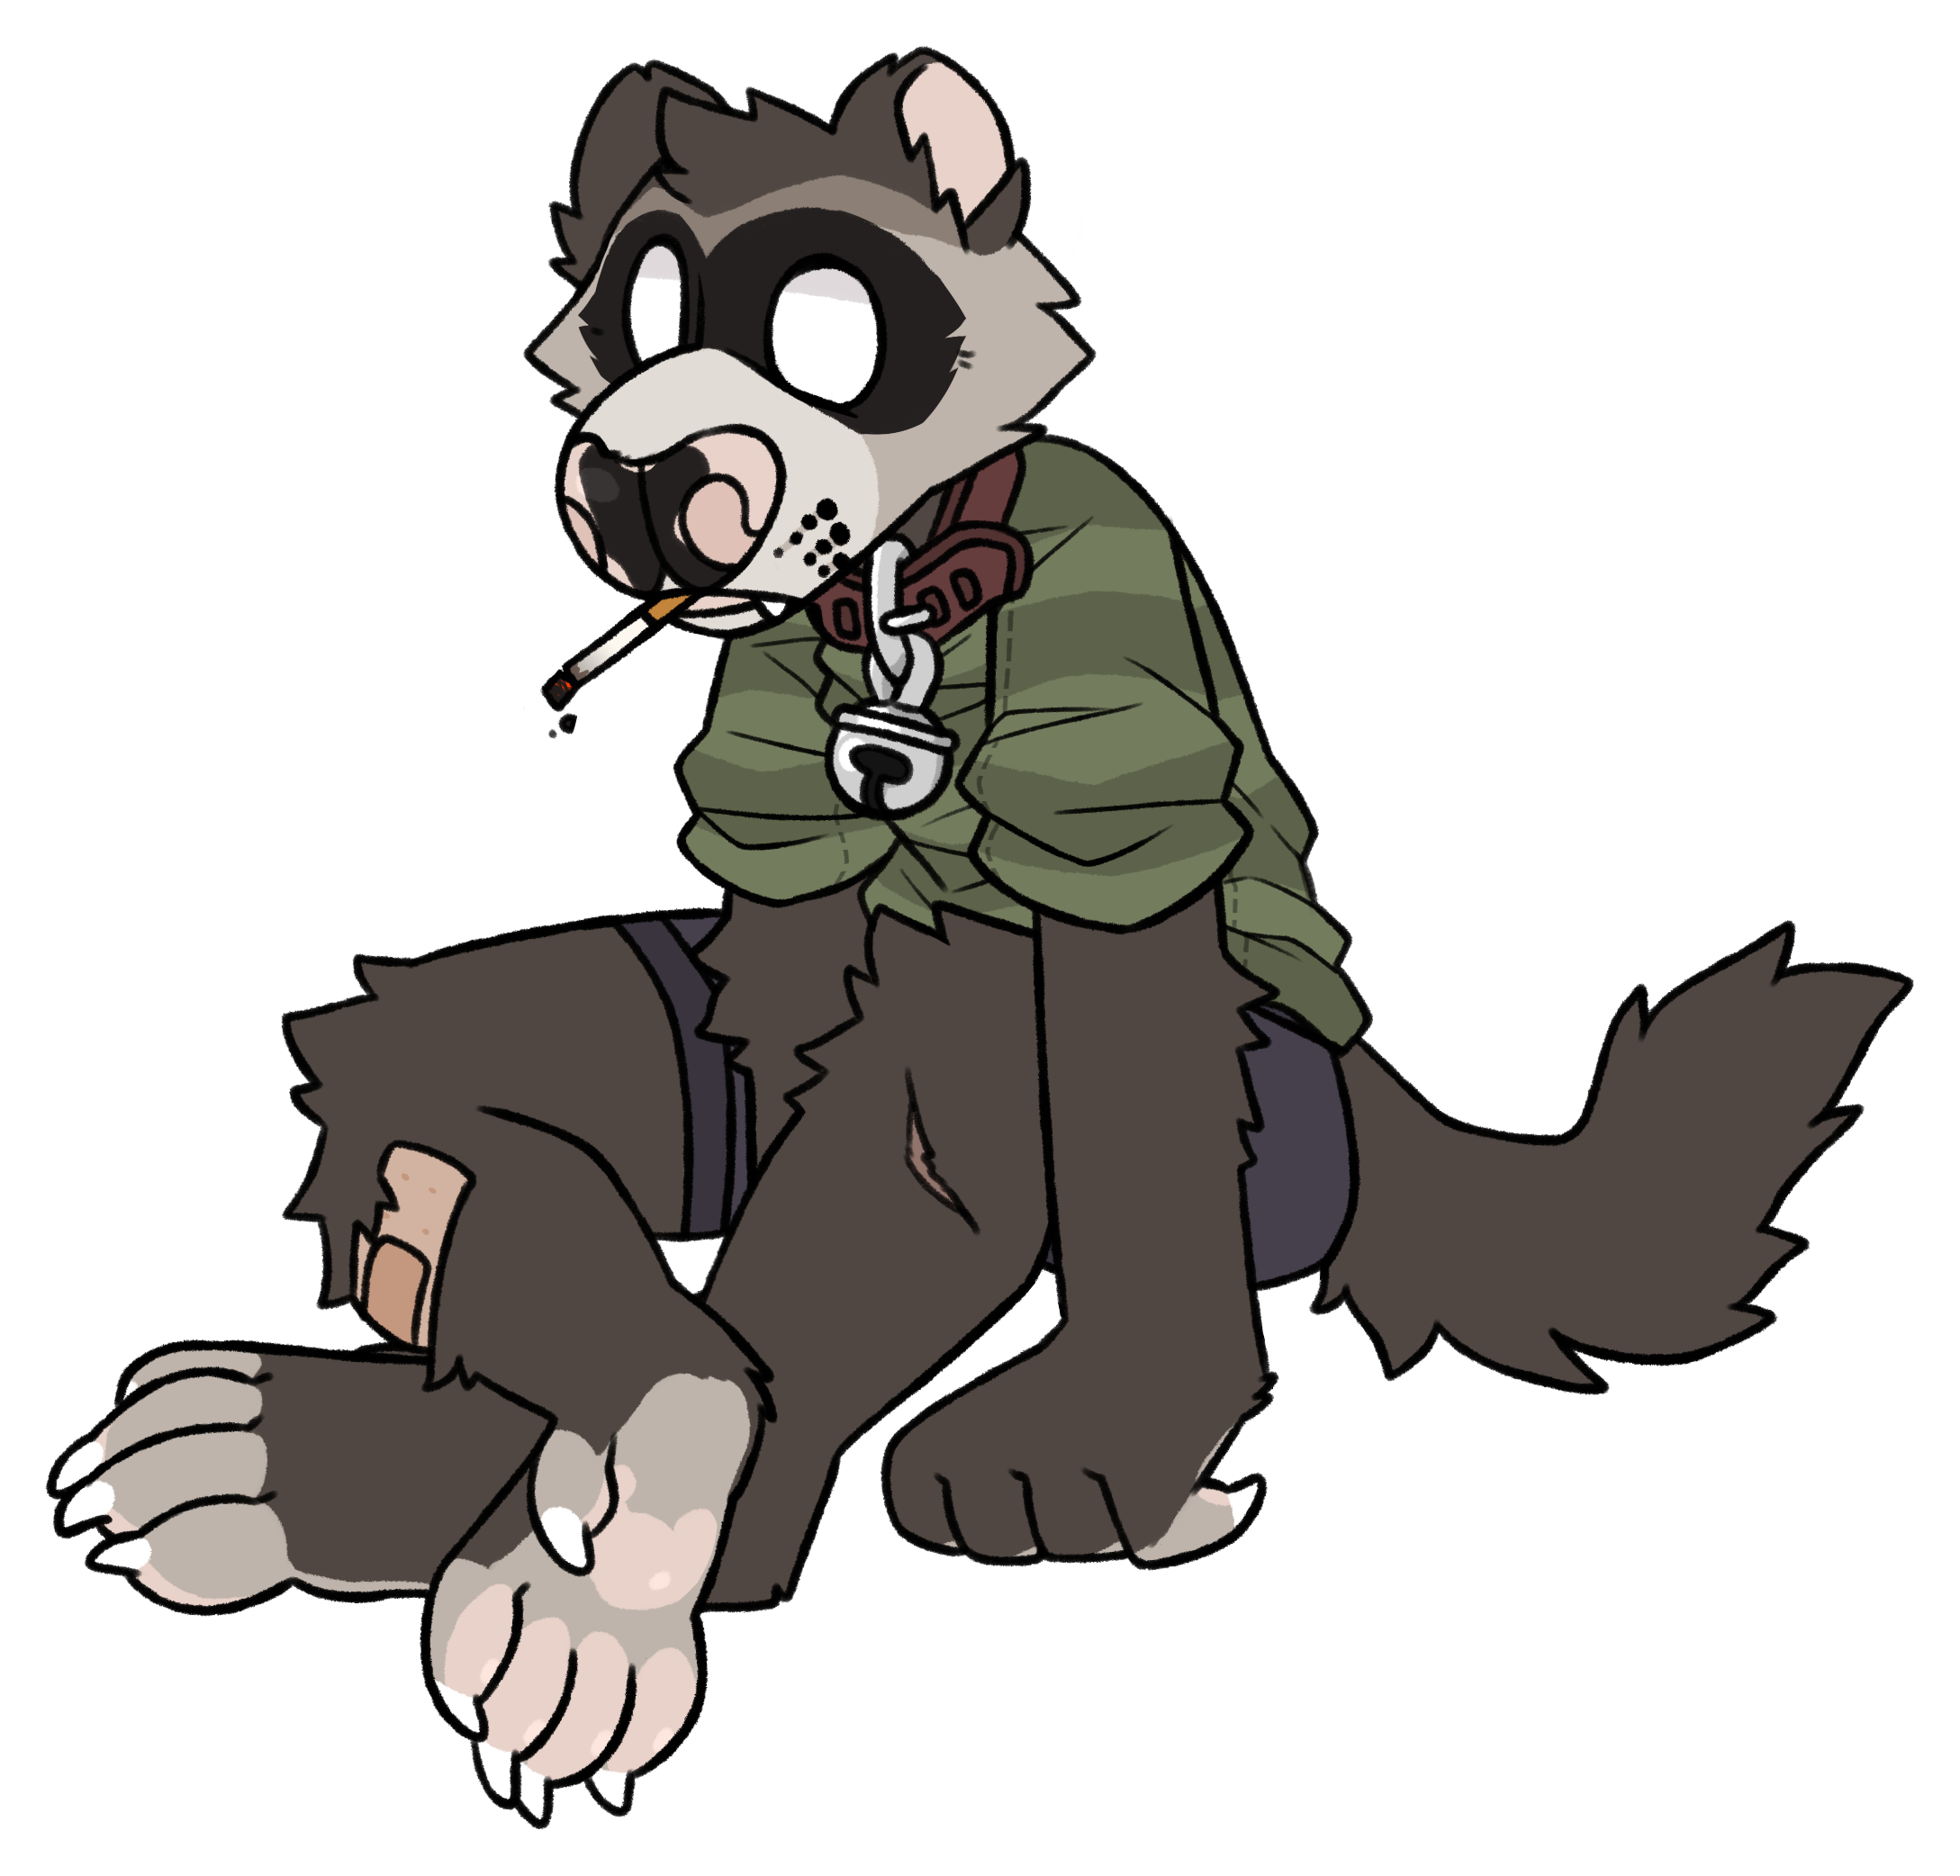 paw clipart badger